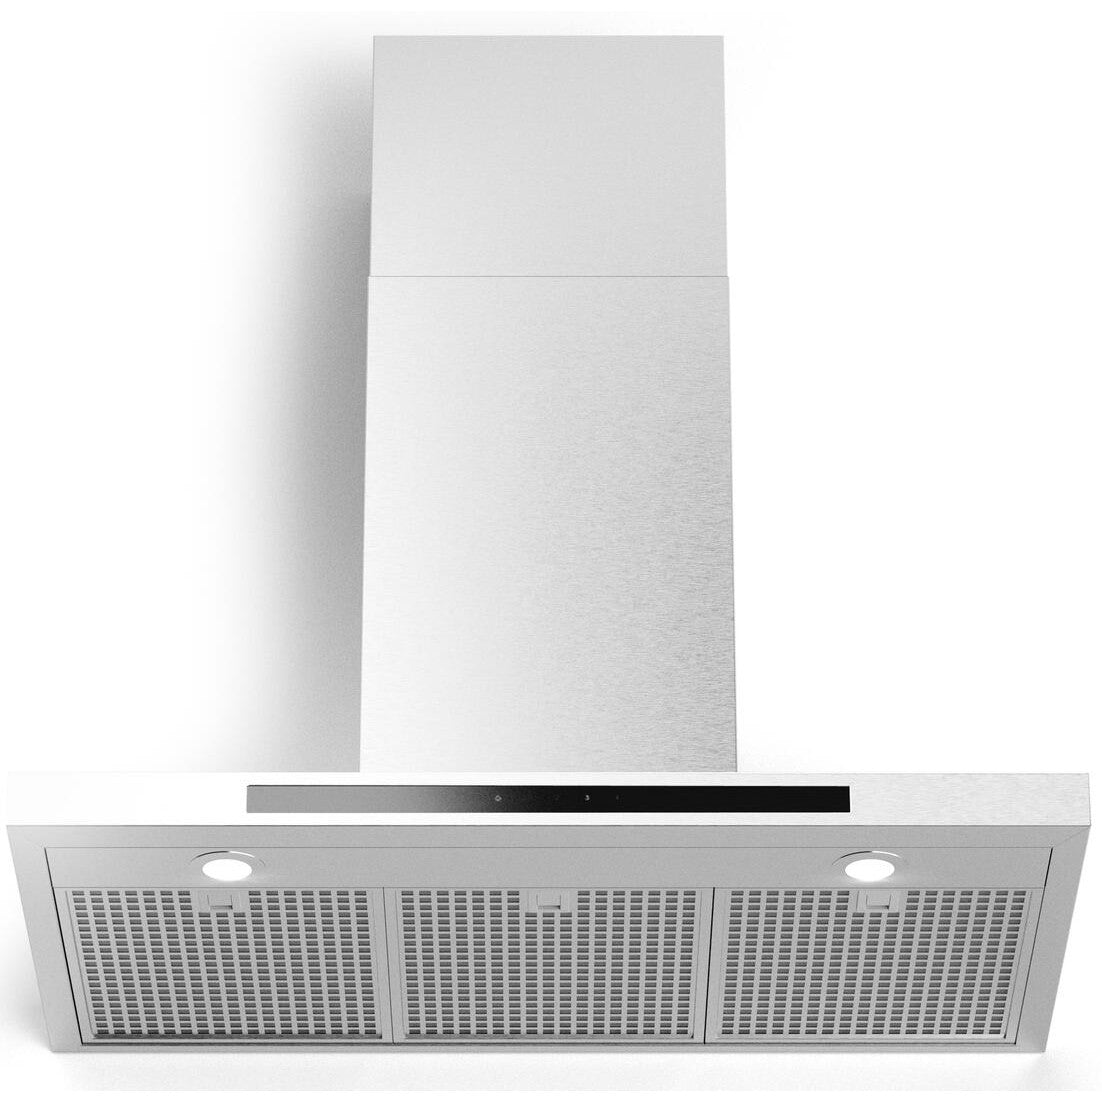 Forte Alberto 30" 600 CFM Convertible Residential Round Duct Stainless Steel Wall Mount Range Hood With Chimney Extension, Recirculating Kit, Charcoal Filters, and LED Lighting